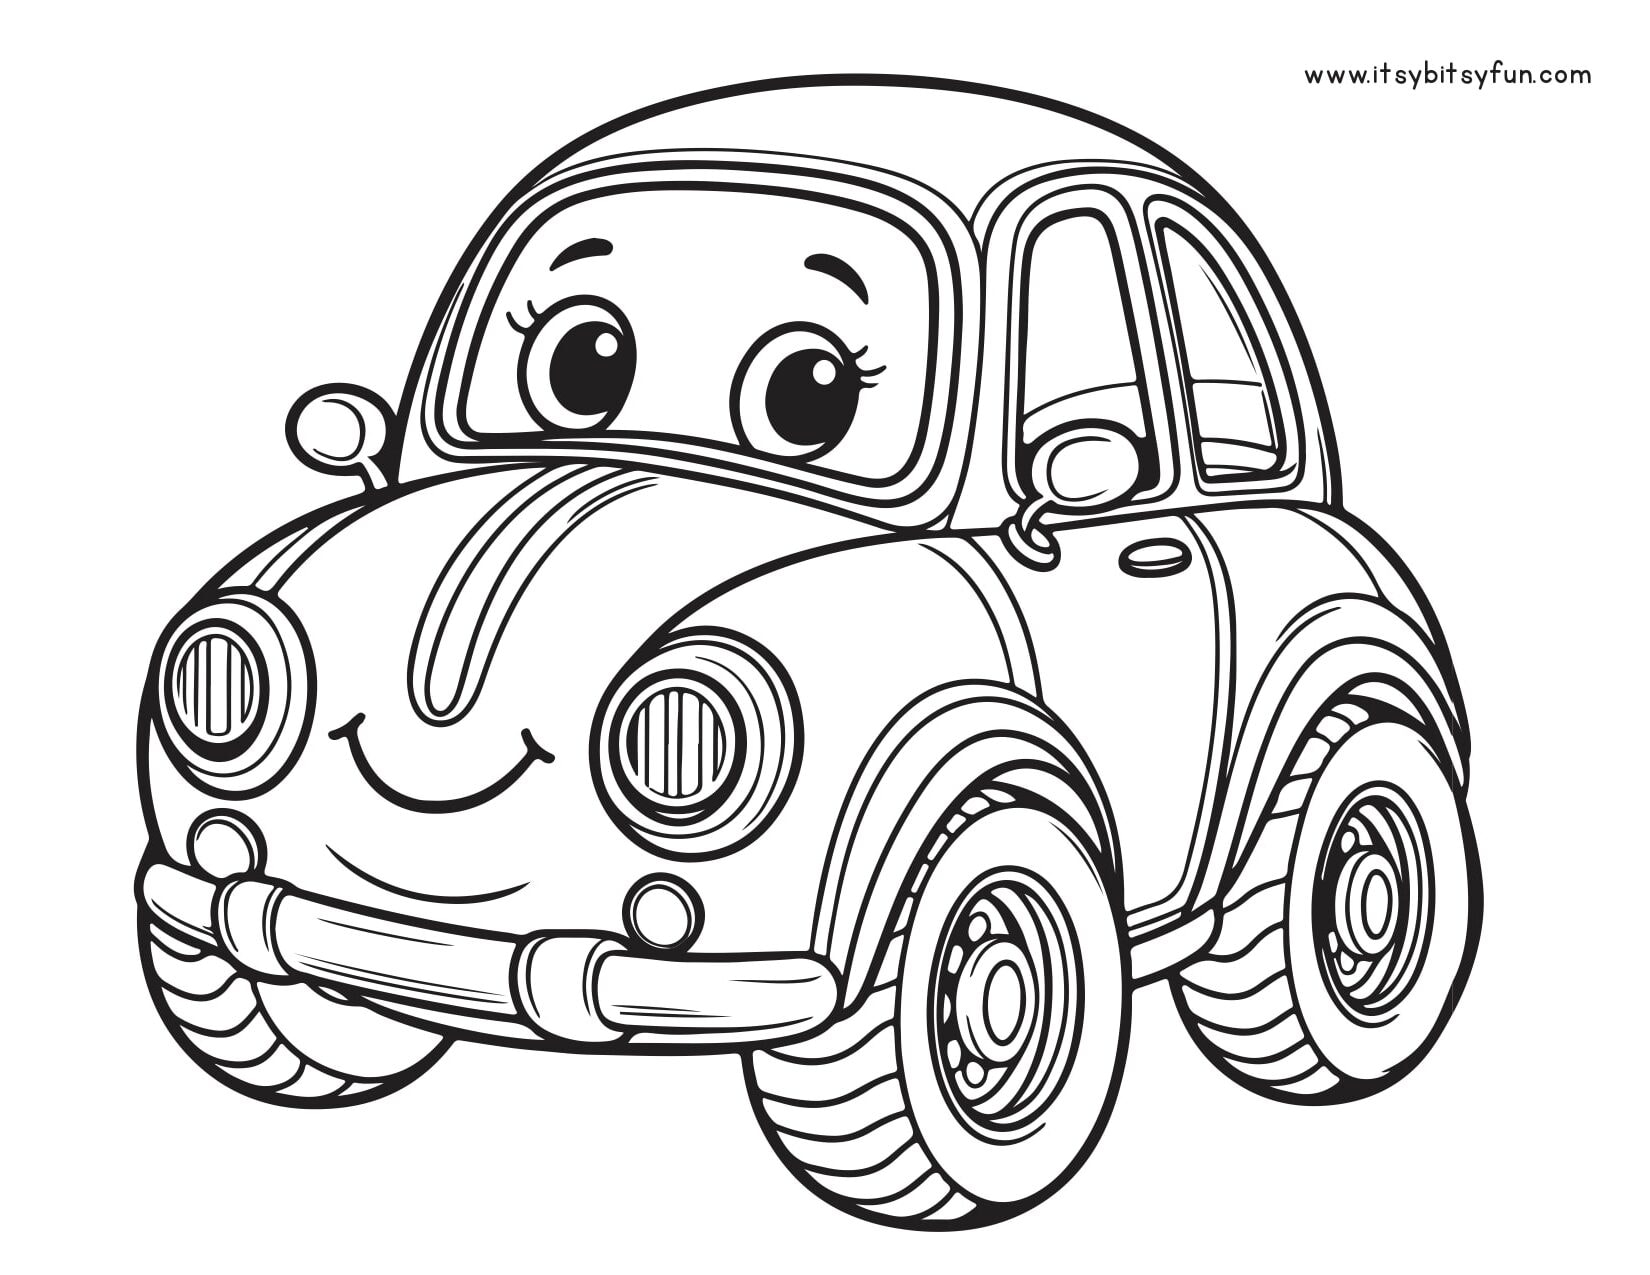 Cute car with eyes for coloring.